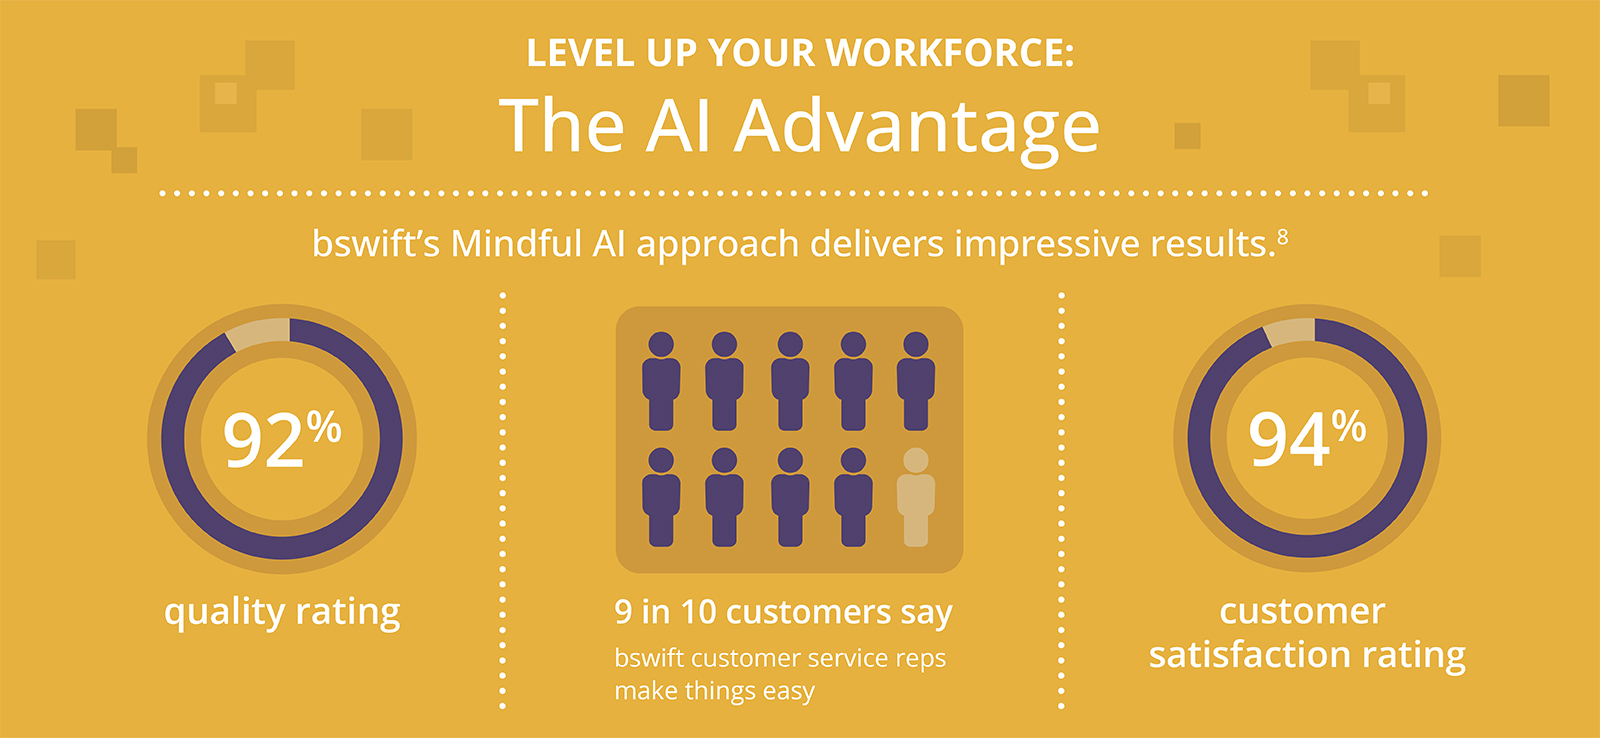 Level Up Your Workforce: The AI Advantage bswift’s Mindful AI approach delivers impressive results.9 92% quality rating 9 in 10 customers say bswift customer service reps make things easy 94% customer satisfaction rating 